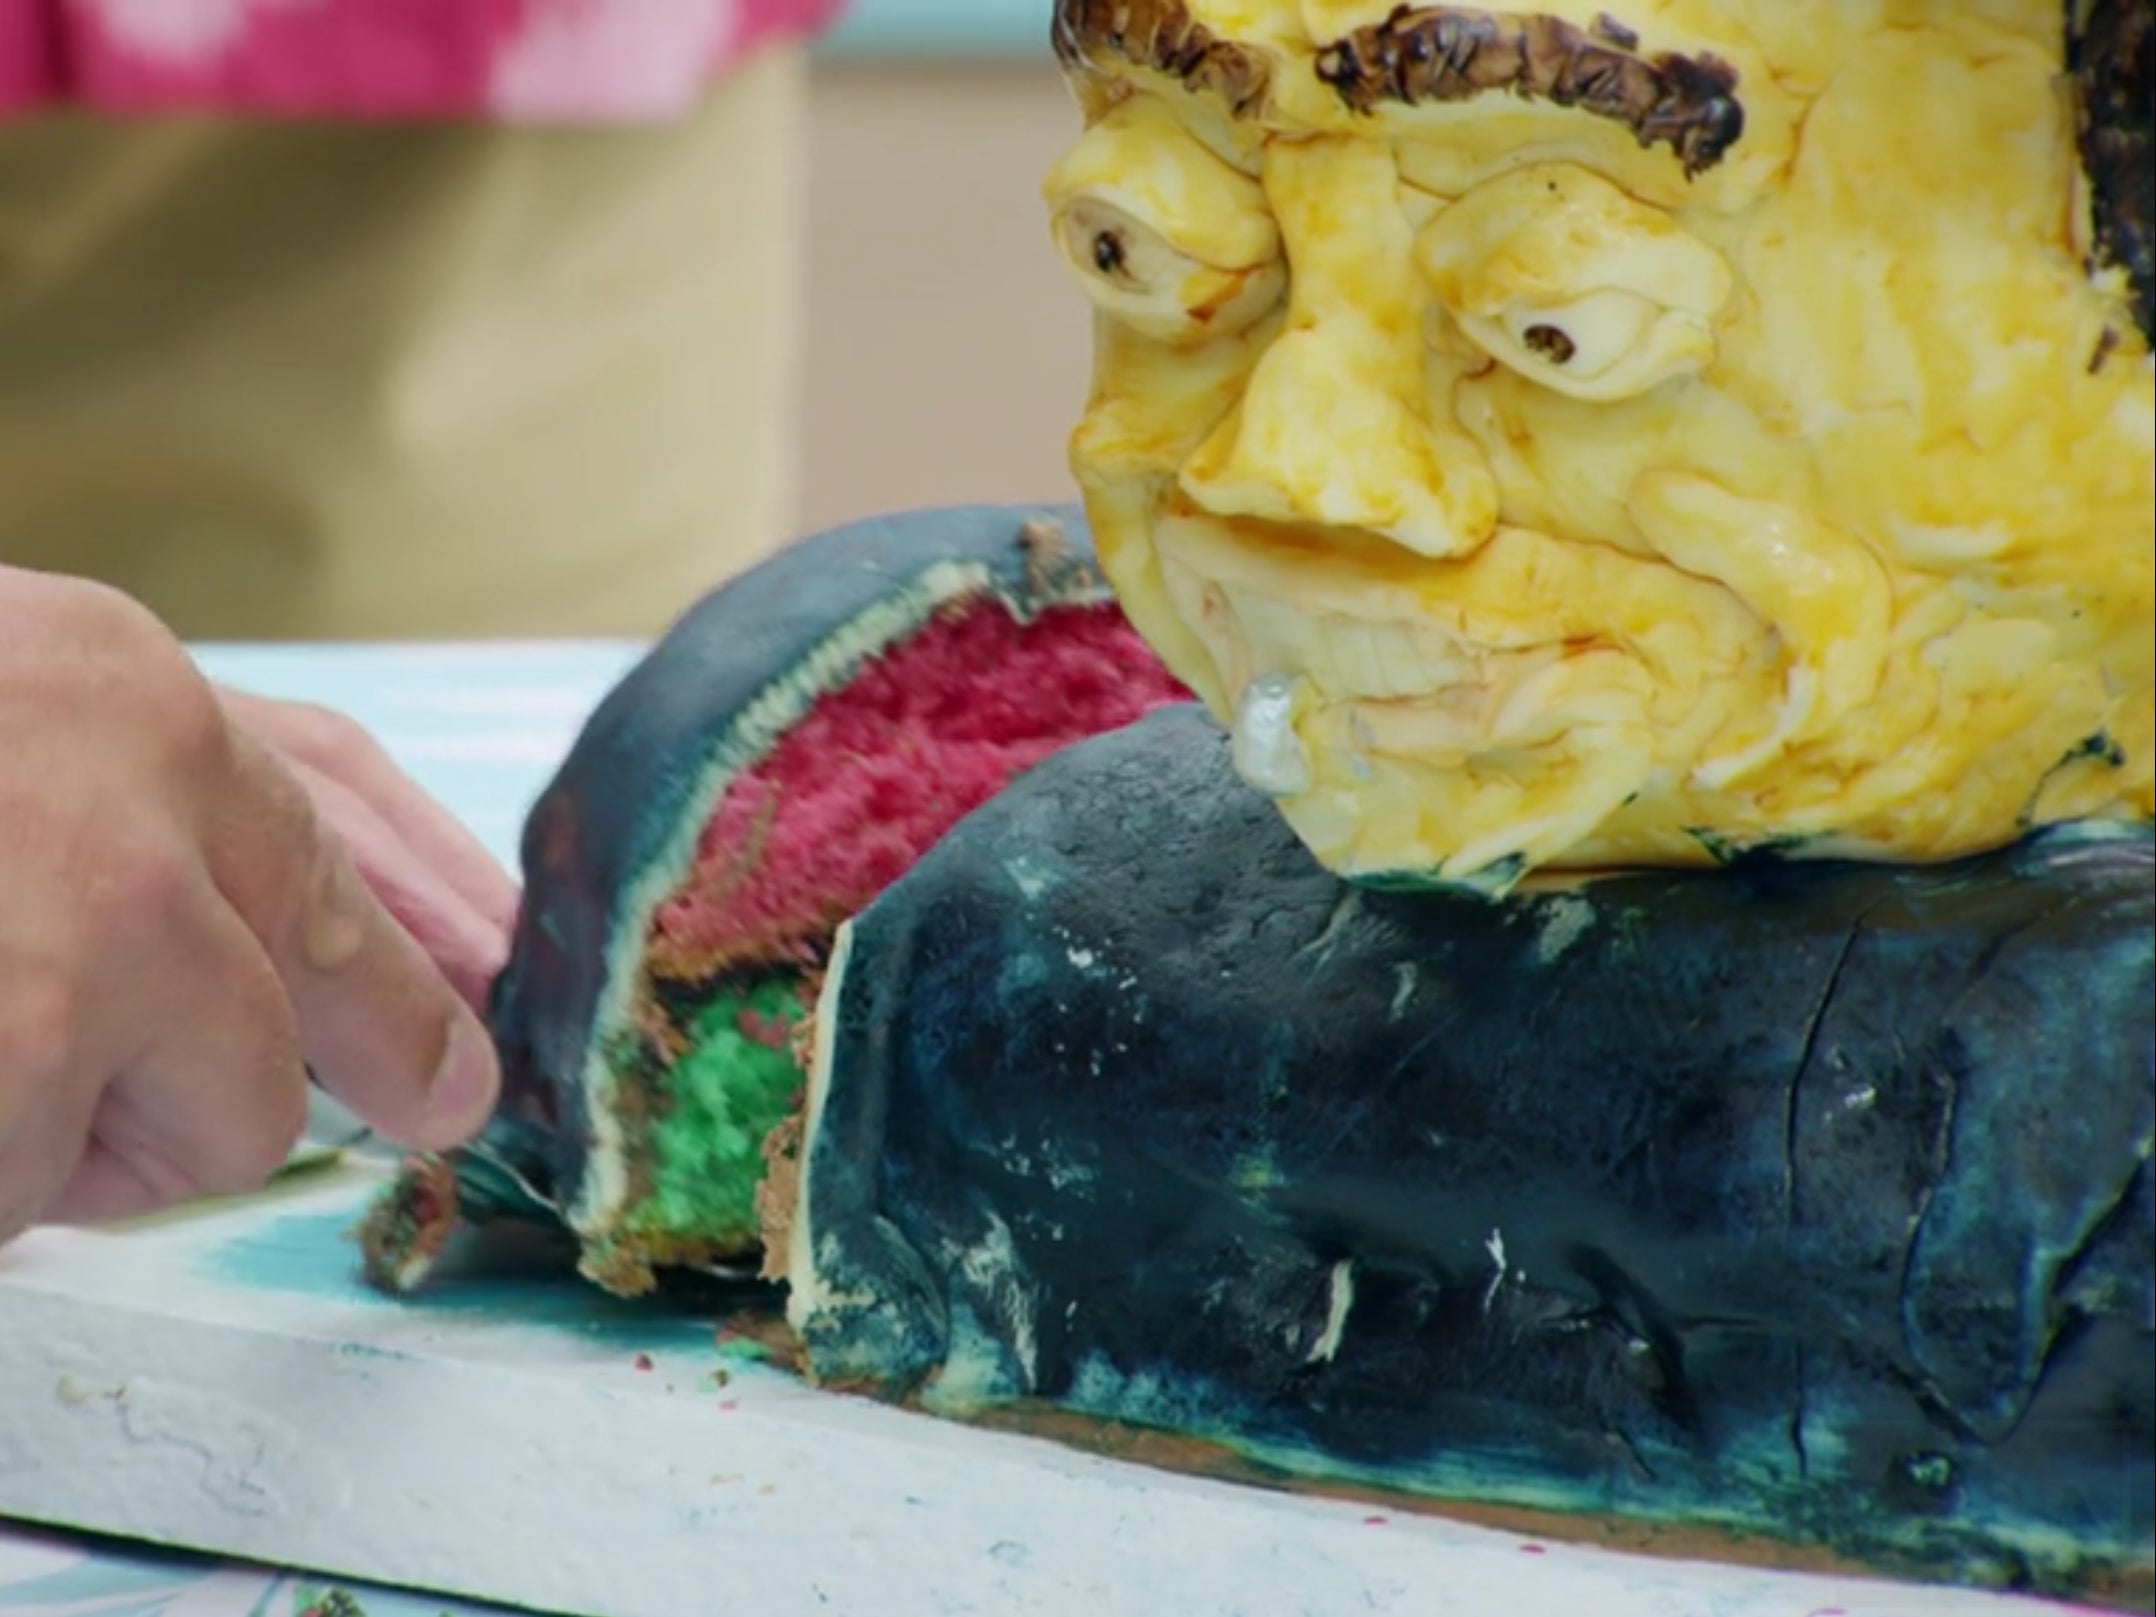 Paul Hollywood cuts into Dave's cake